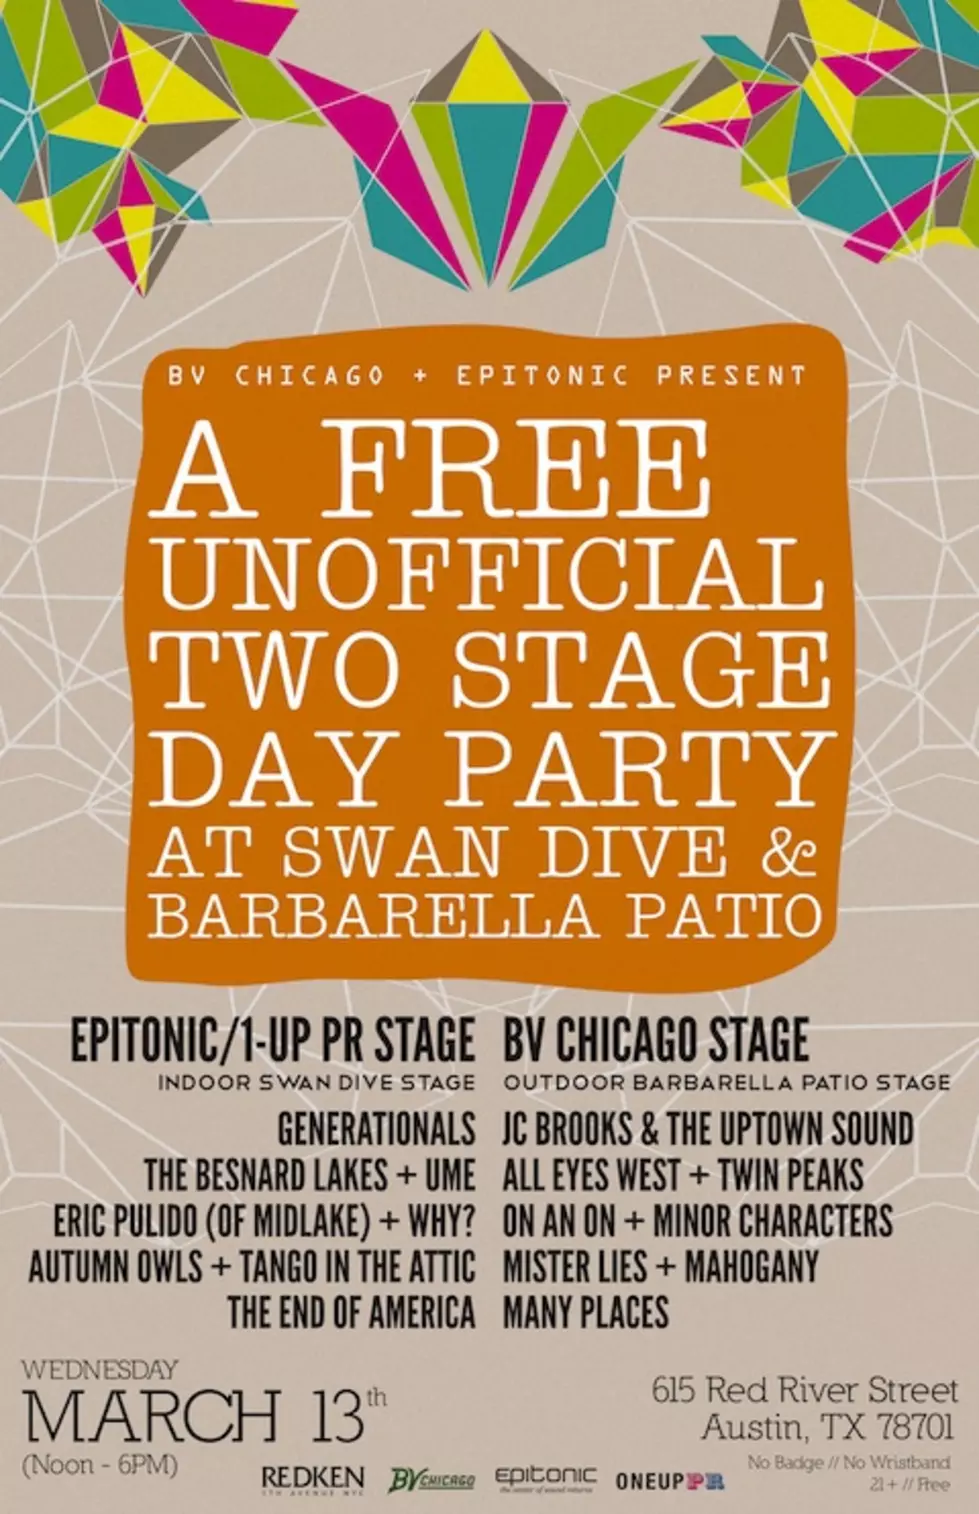 BV Chicago teams with Epitonic for Austin Day Party